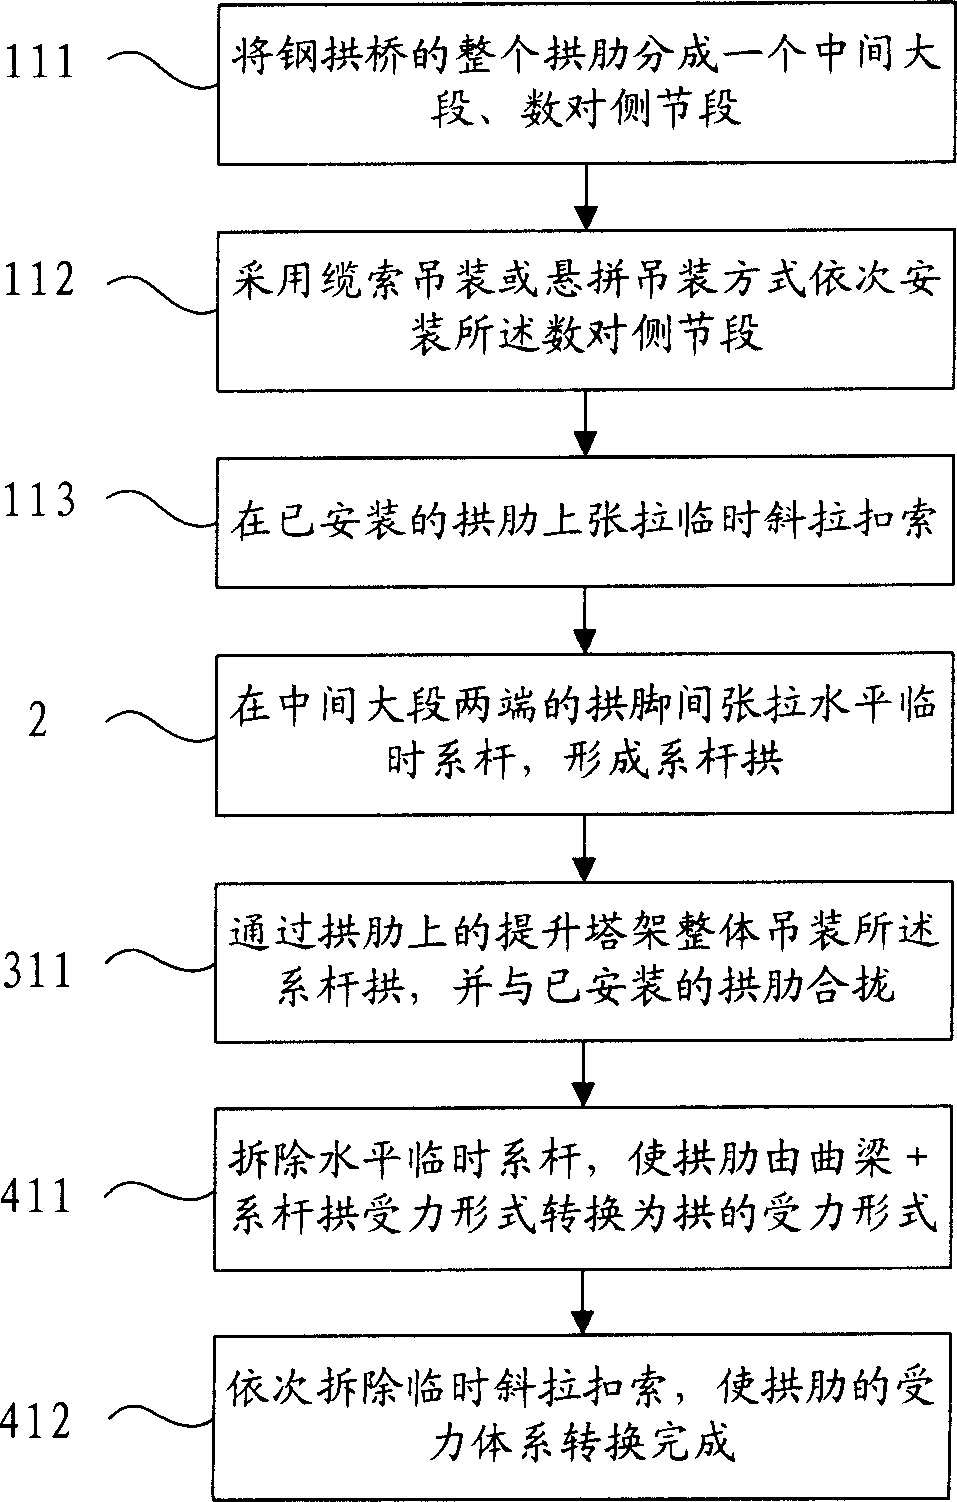 Installing and closure method of steel arched bridge arch rib large segment and lifting system